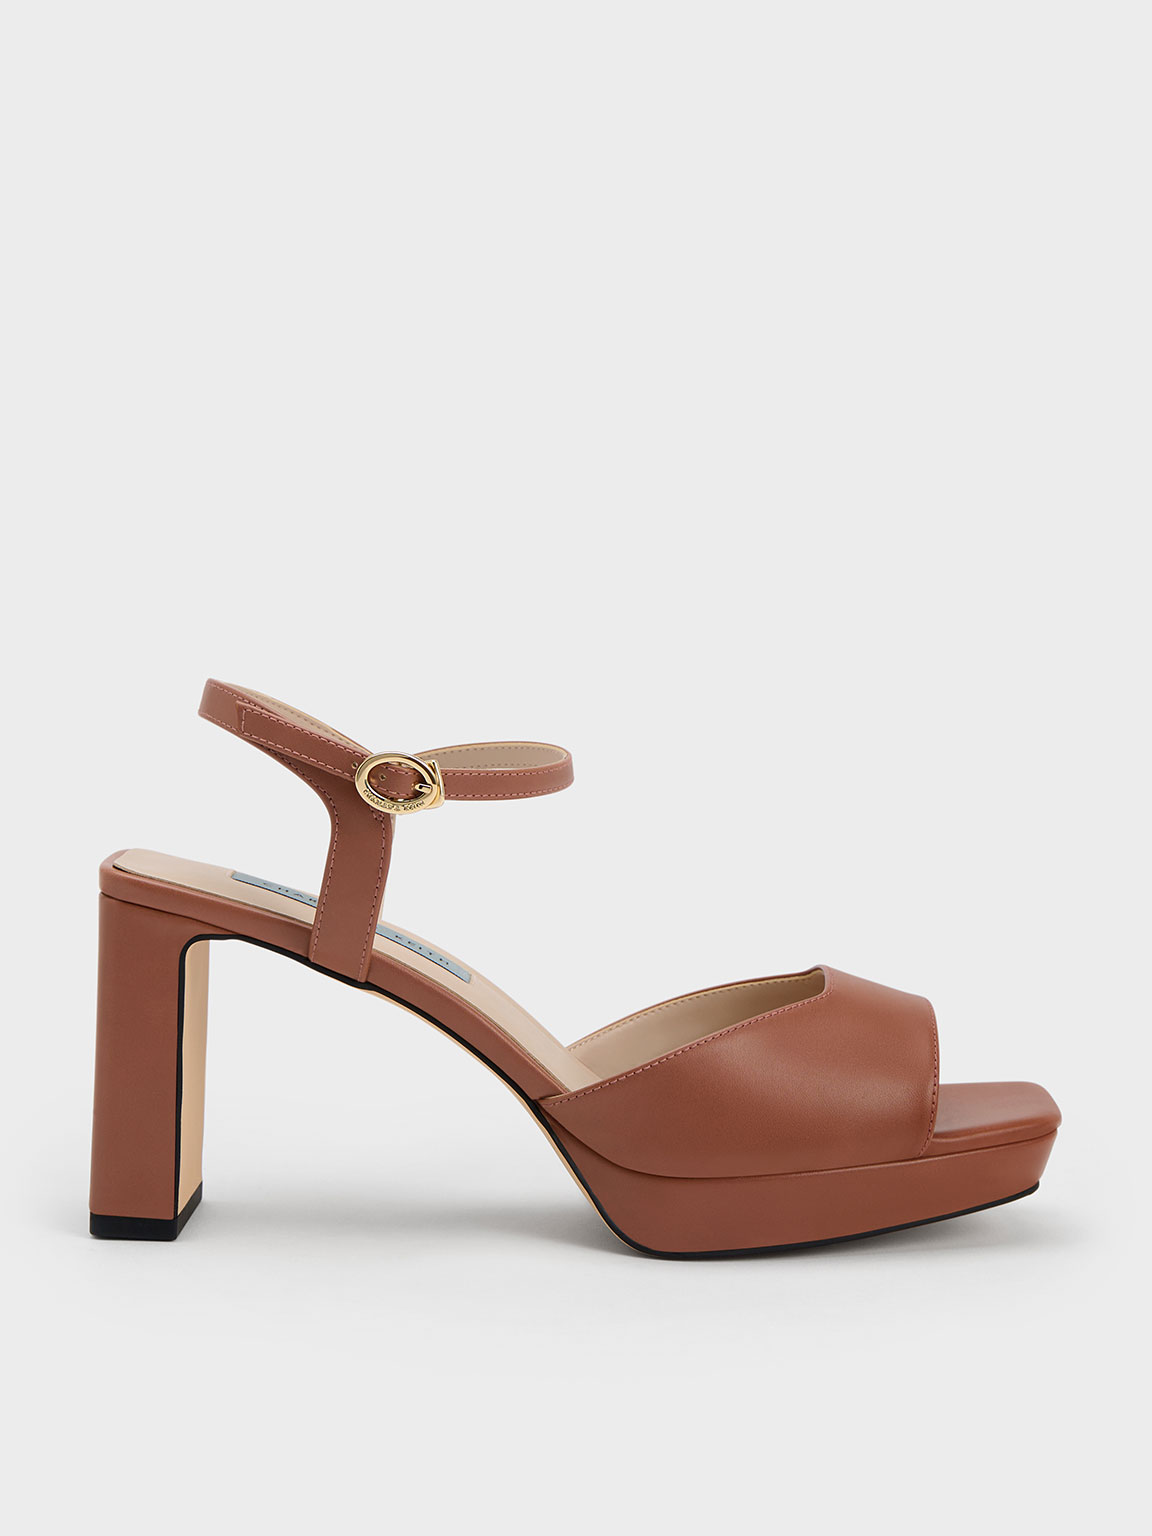 Kendall Rosso Red Leather Flared Heel Sandal